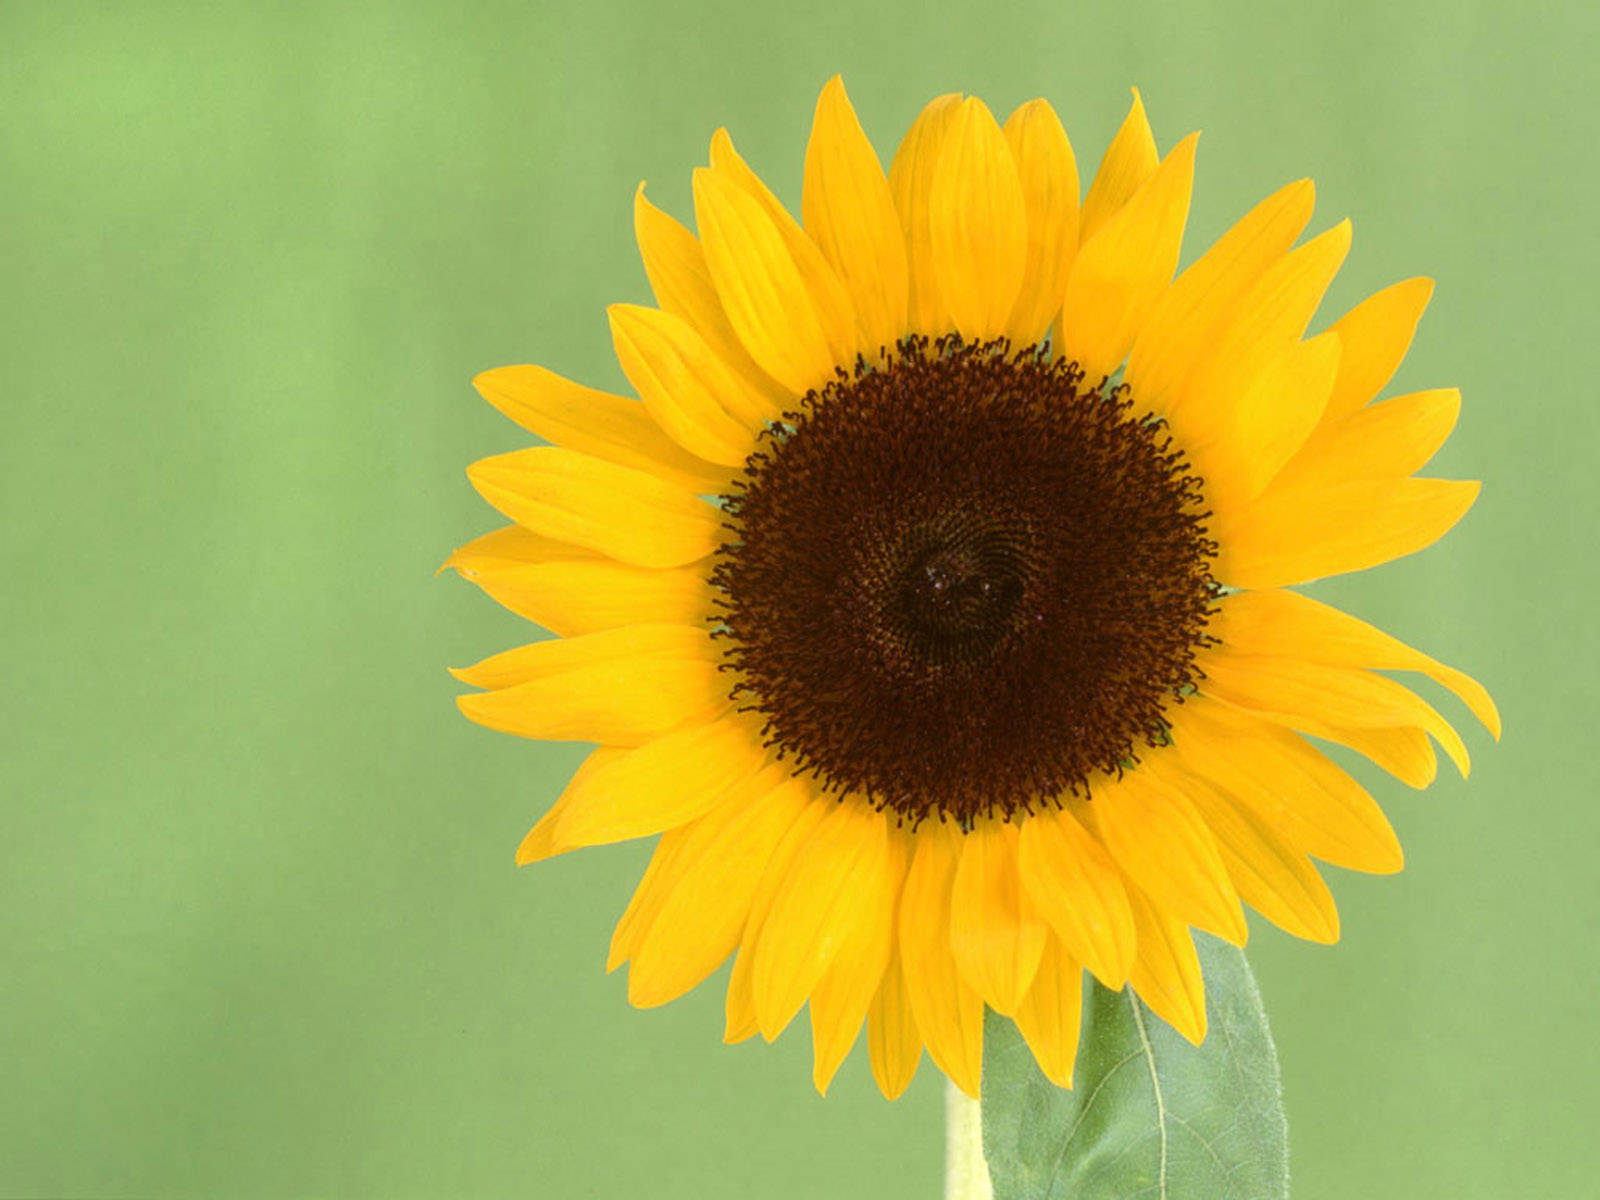 Bright Sunflower on a Sunny Day Wallpaper